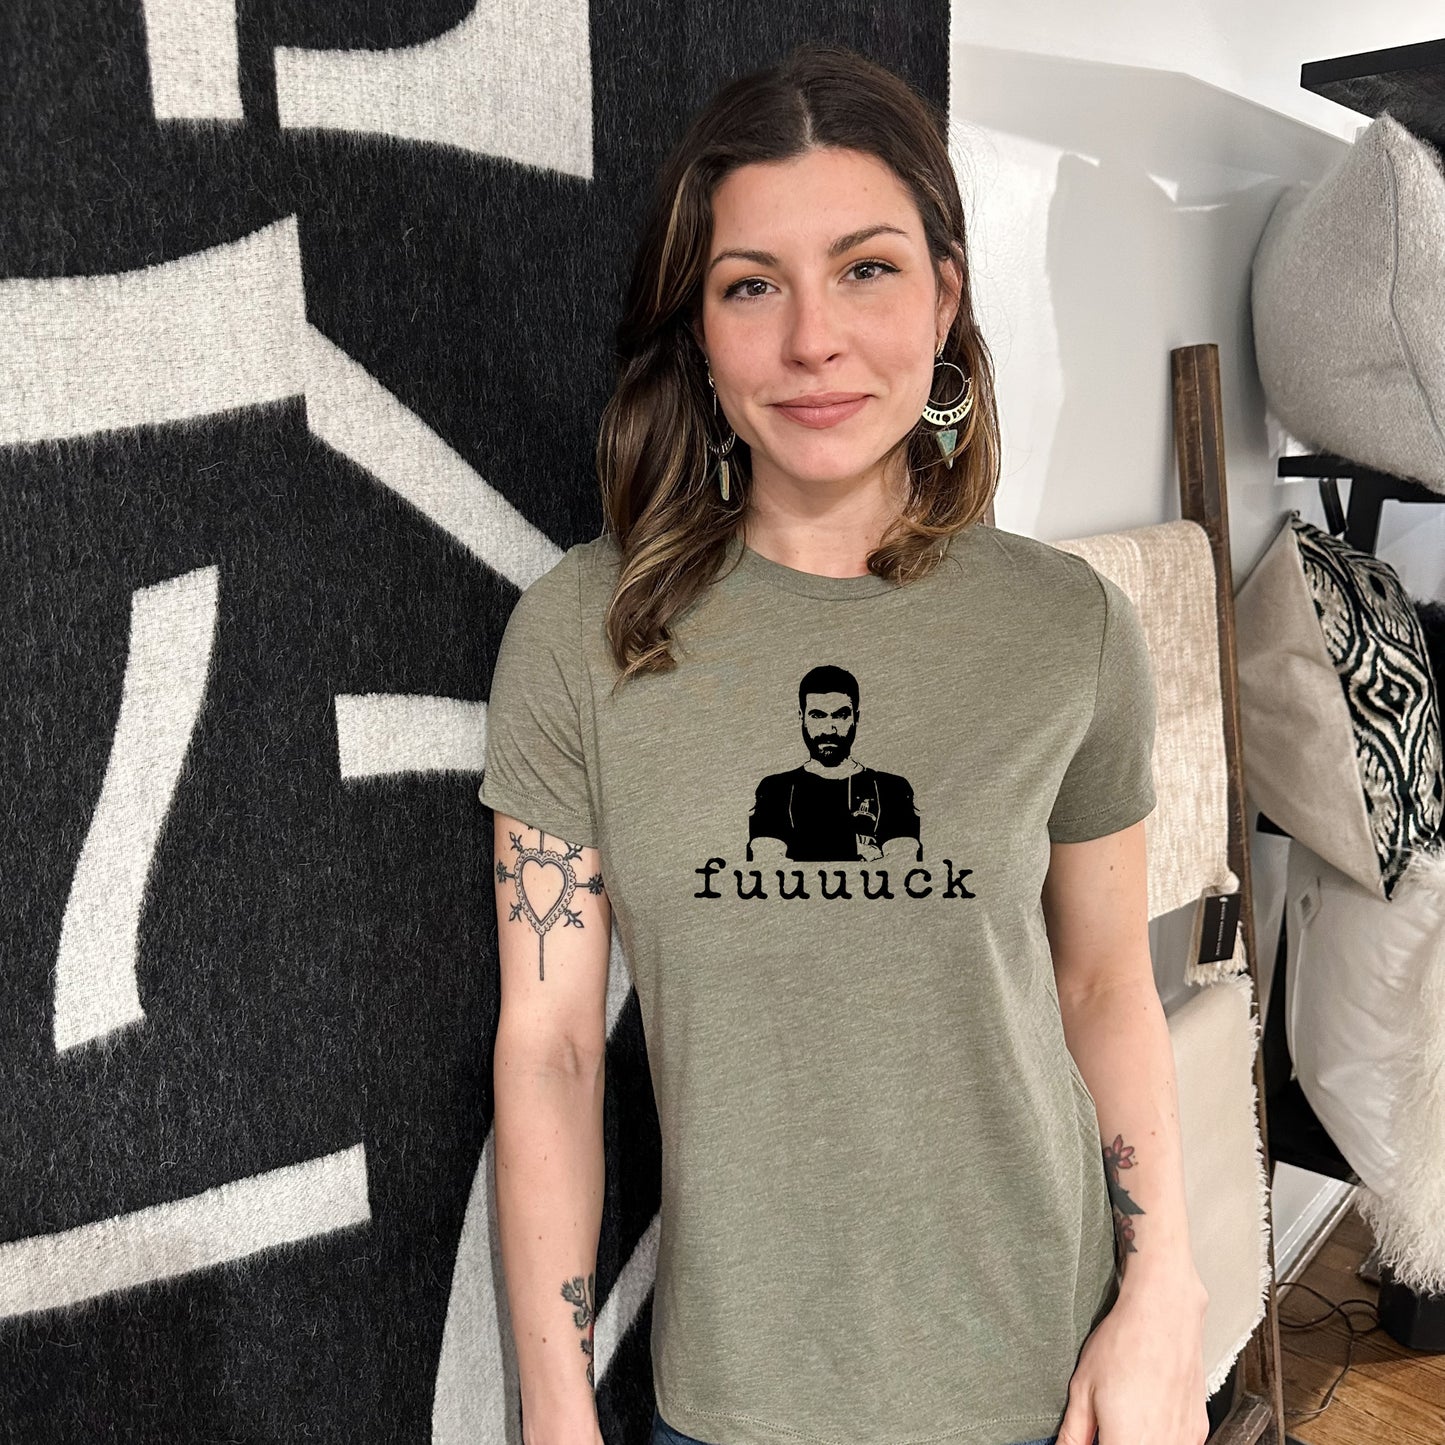 Fuuuuck (Roy Kent) - Women's Crew Tee - Dusty Blue or Olive